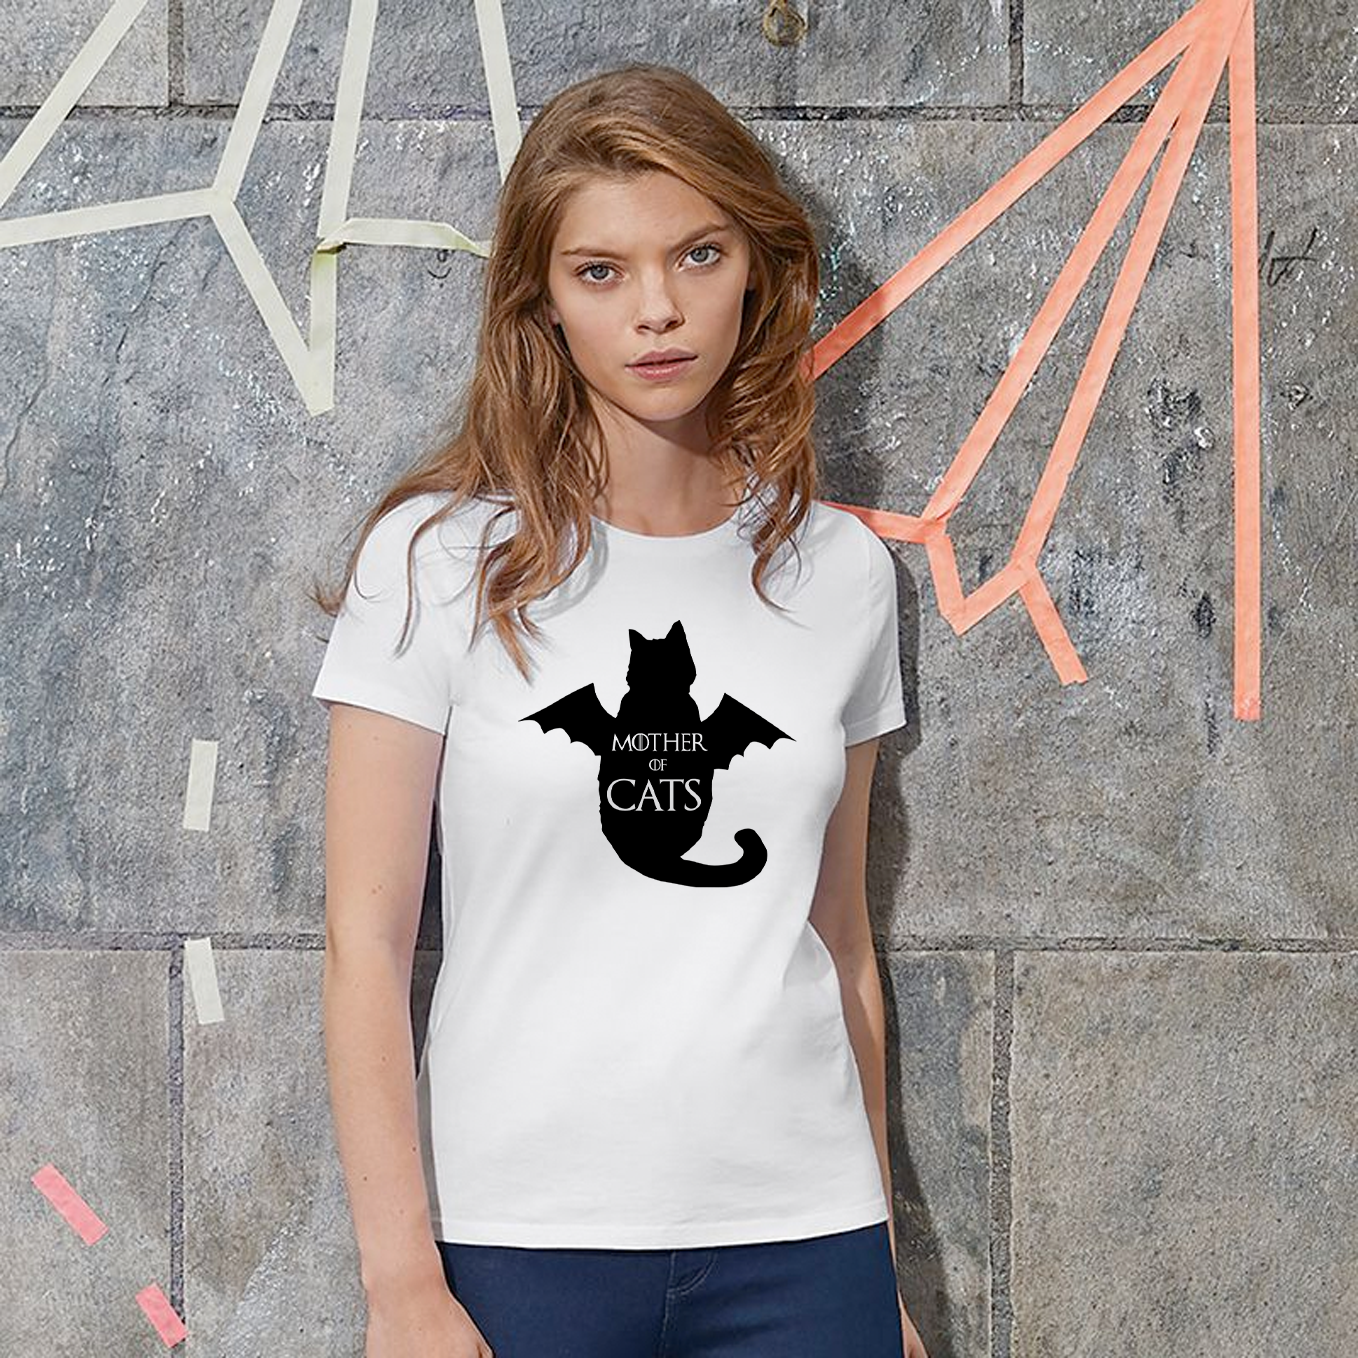 T-shirt "Mother of Cats"